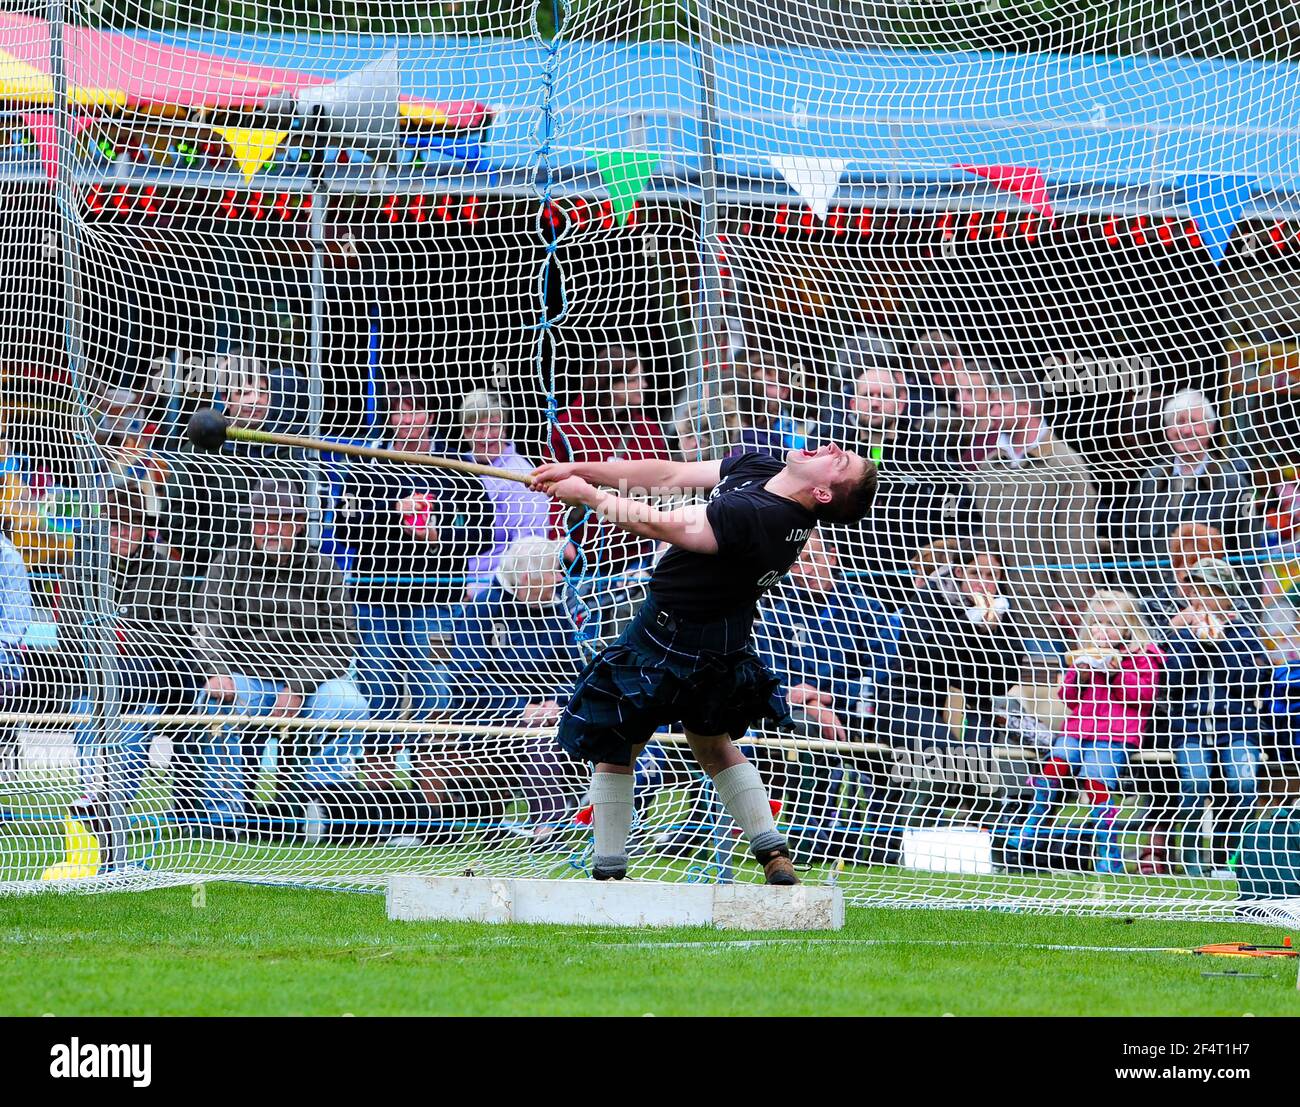 Athlete competing in the hammer throw event at the Ballater Highland Games, Aberdeenshire, Scotland. Stock Photo